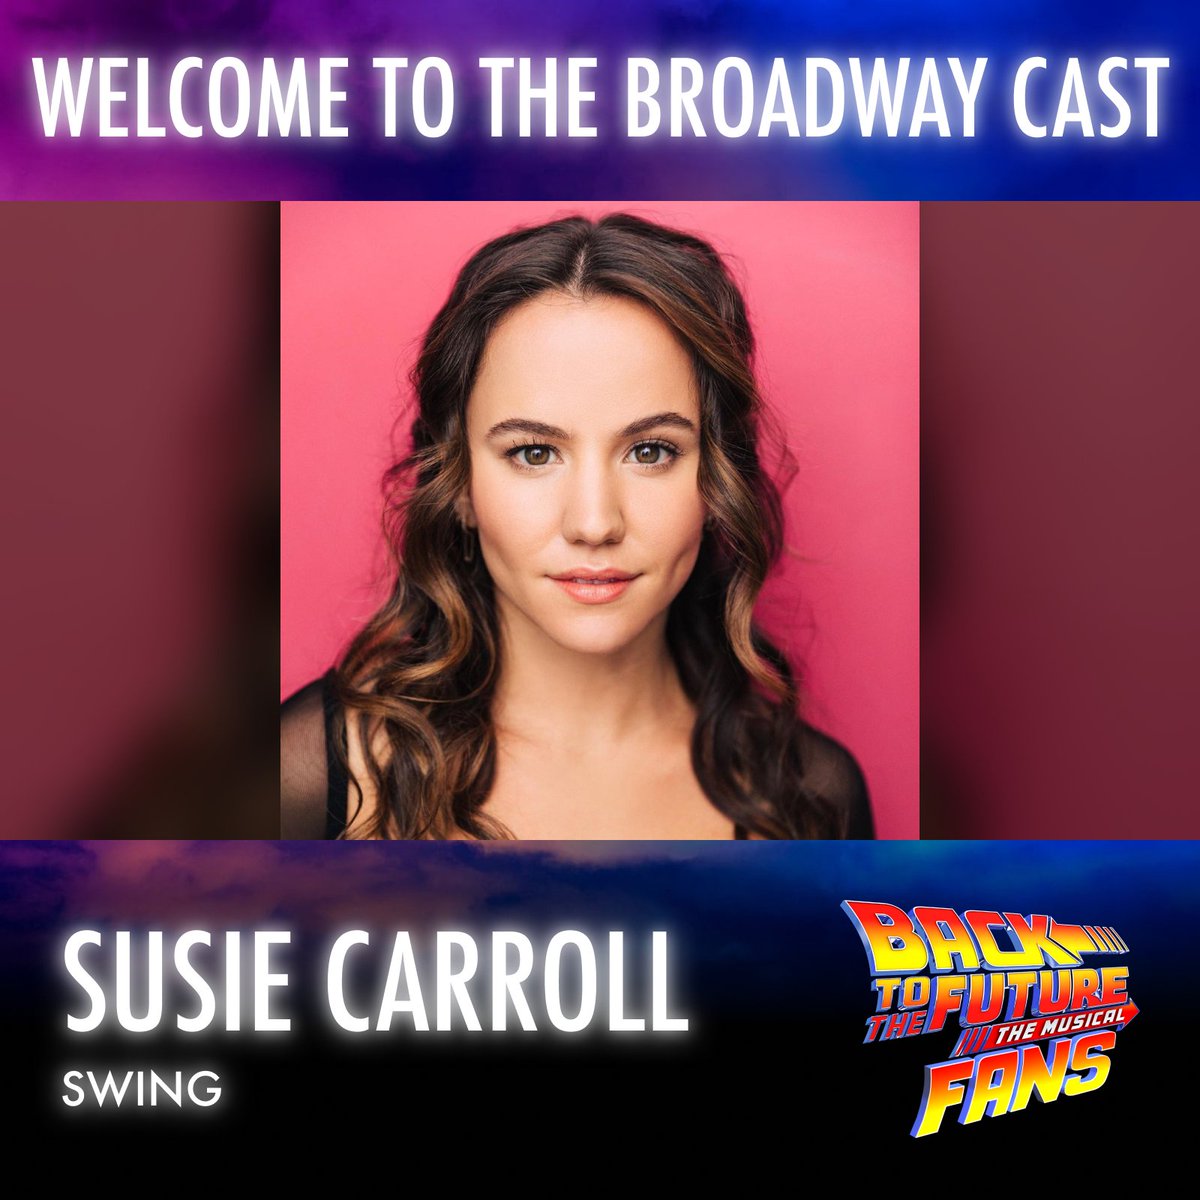 The Chamber of Commerce welcomes Susie Carroll to Hill Valley! 💐

According to @playbill, Susie joins the amazing @BTTFBway Broadway cast as a swing tomorrow. Many congratulations and a huge warm welcome! 👏

#bttfbway #bttfbroadway #backtothefuturebroadway #broadway #swing